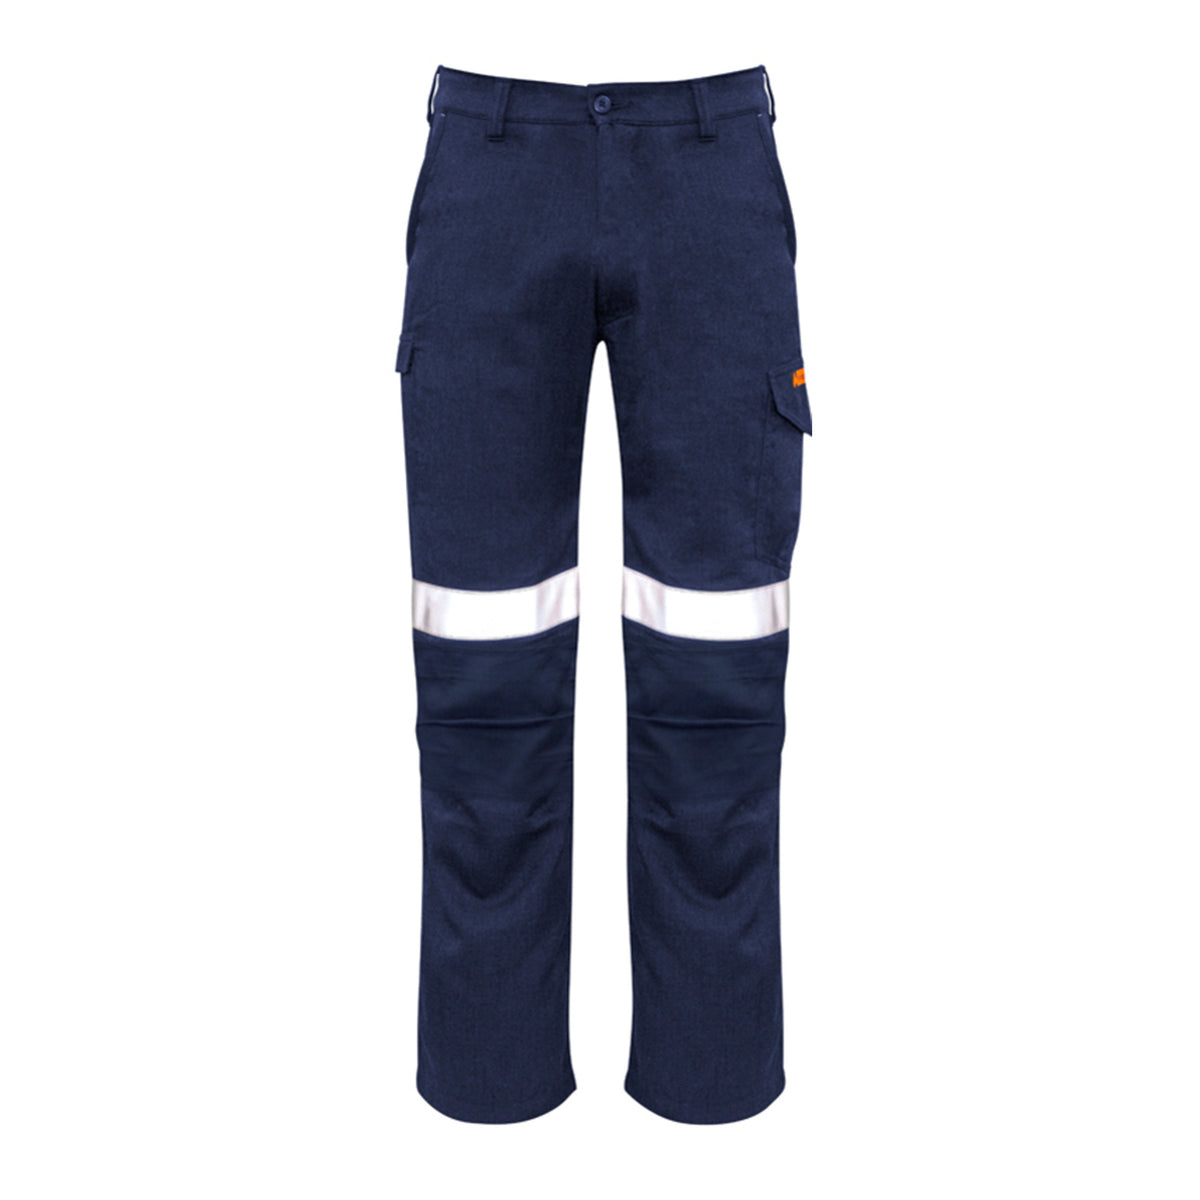 mens tape cargo pant with tape and modatech fabric